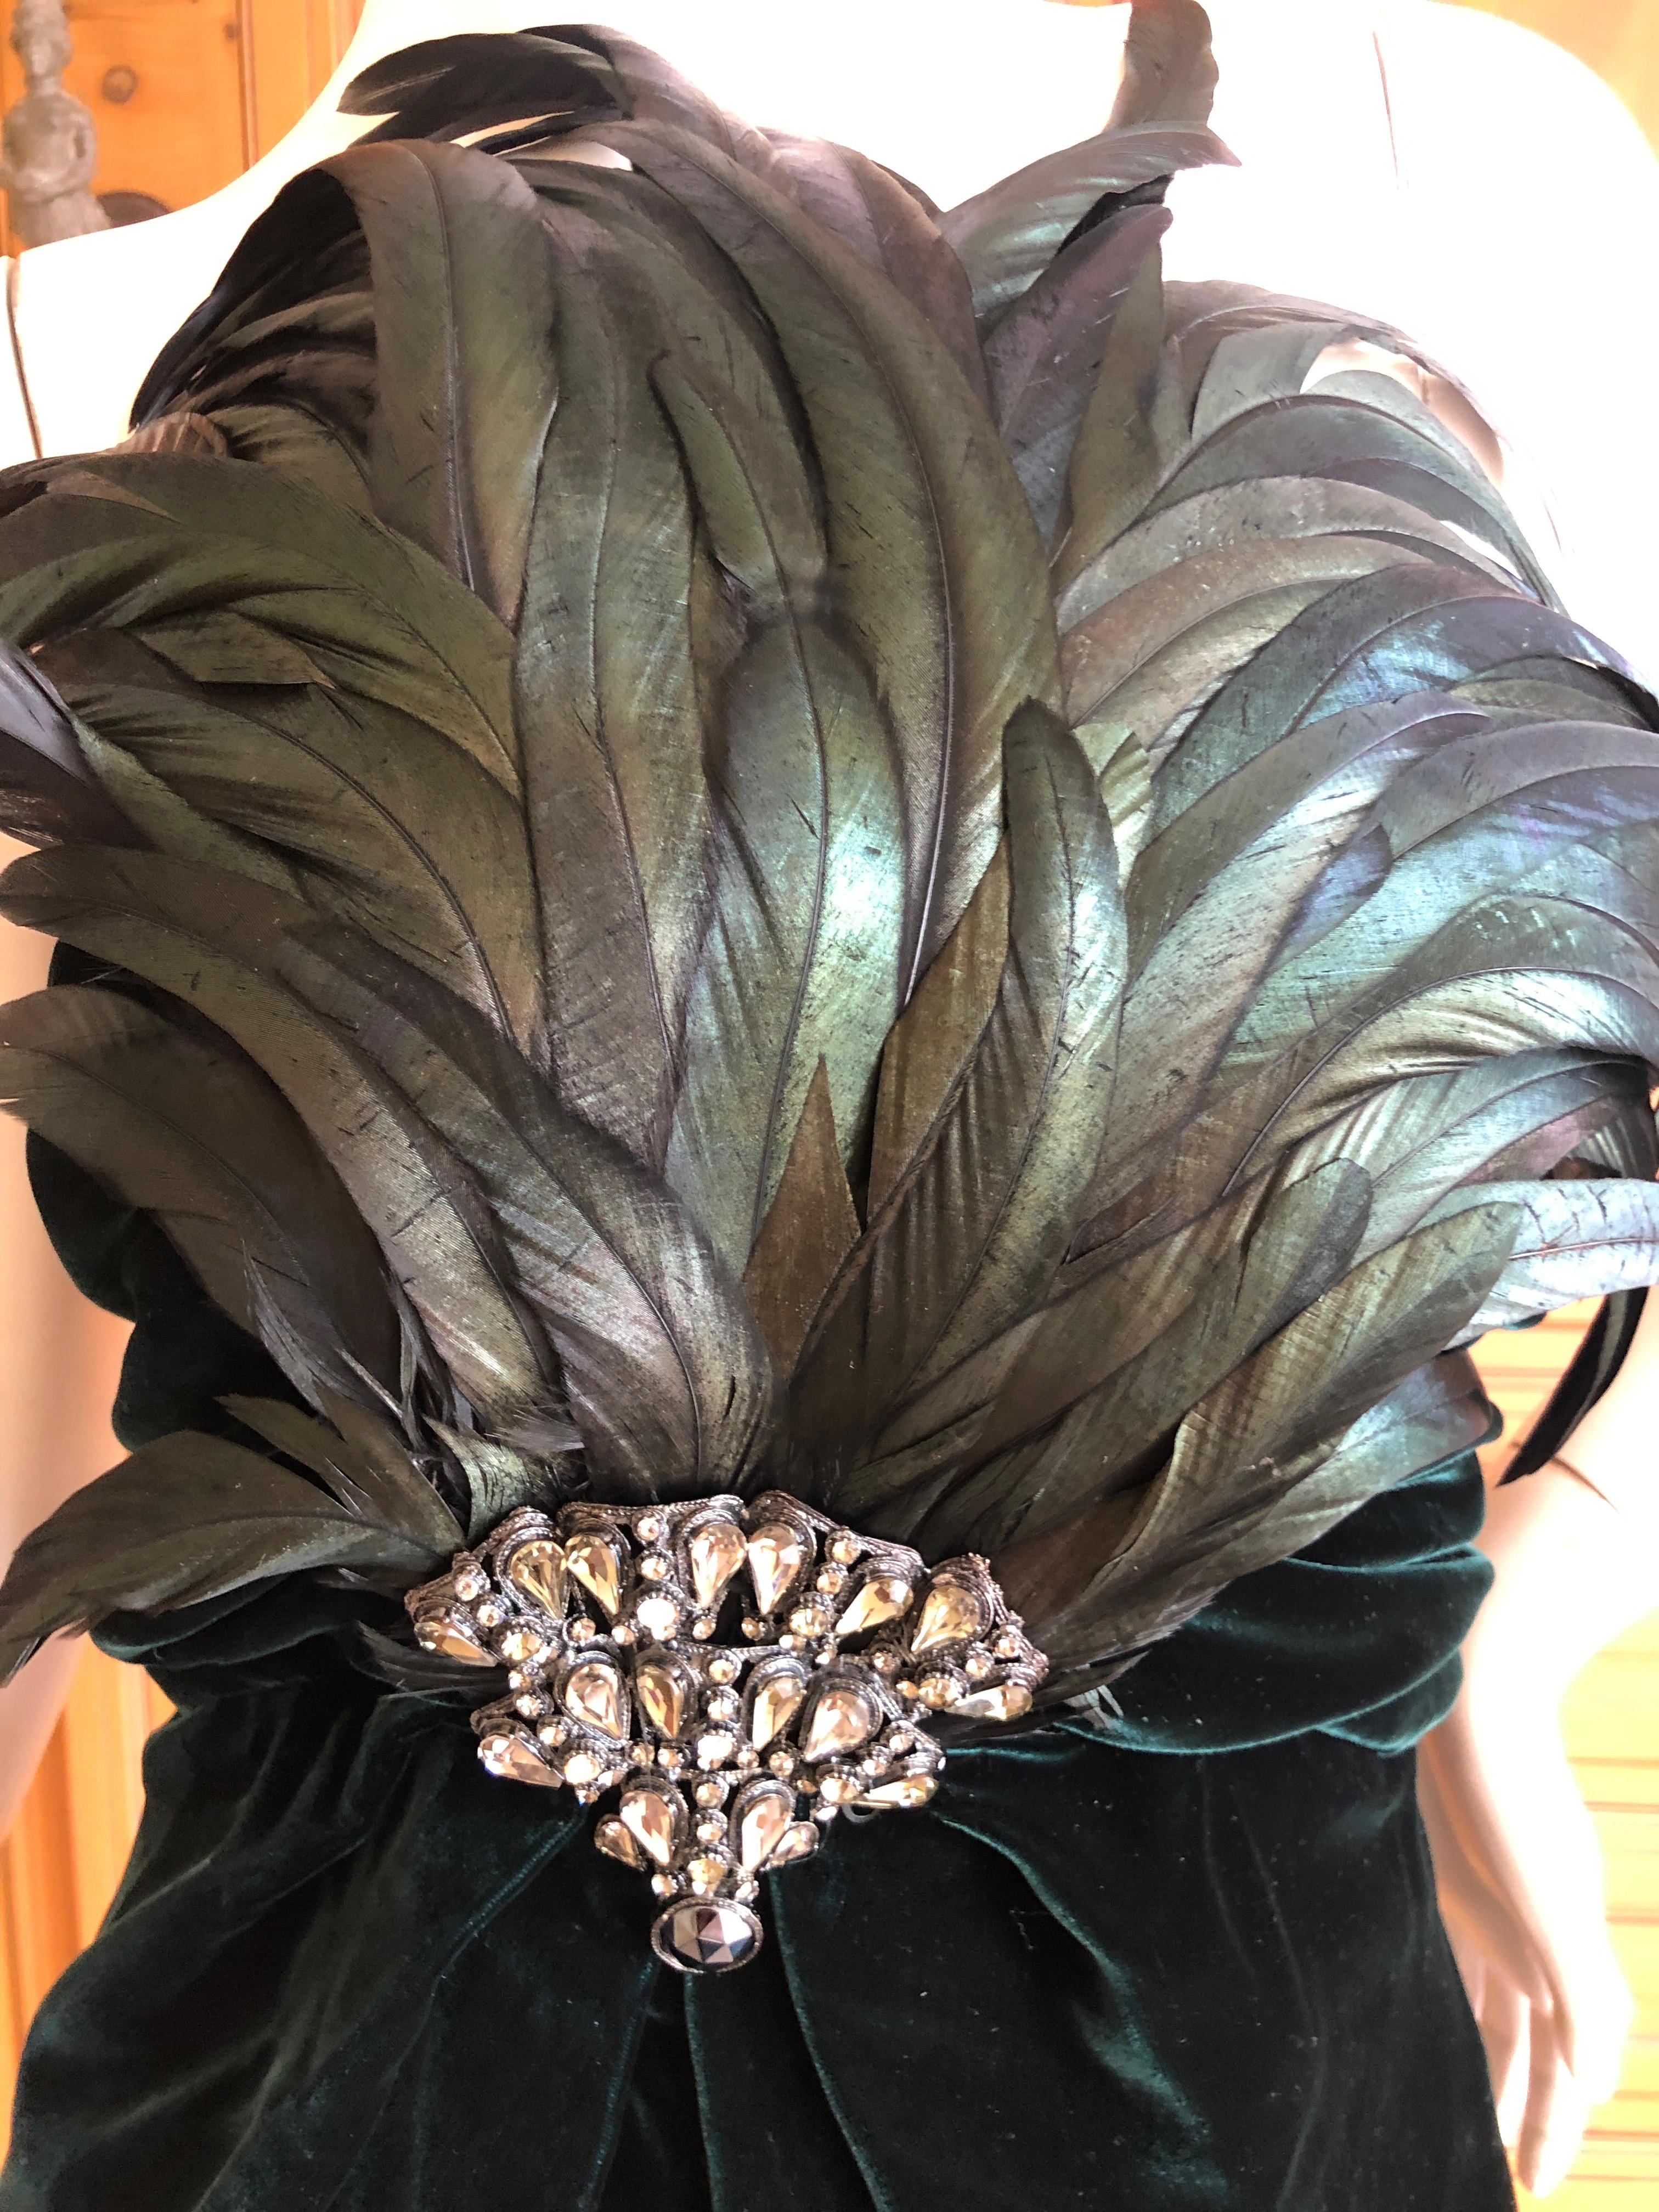 Bill Blass Fall 1986 Green Velvet Jeweled & Feathered Strapless Cocktail Dress .
I created the jeweled center piece for Mr Blass, this is one of the rare ones created with the original jewel. I couldn't keep up with the production, so they finished